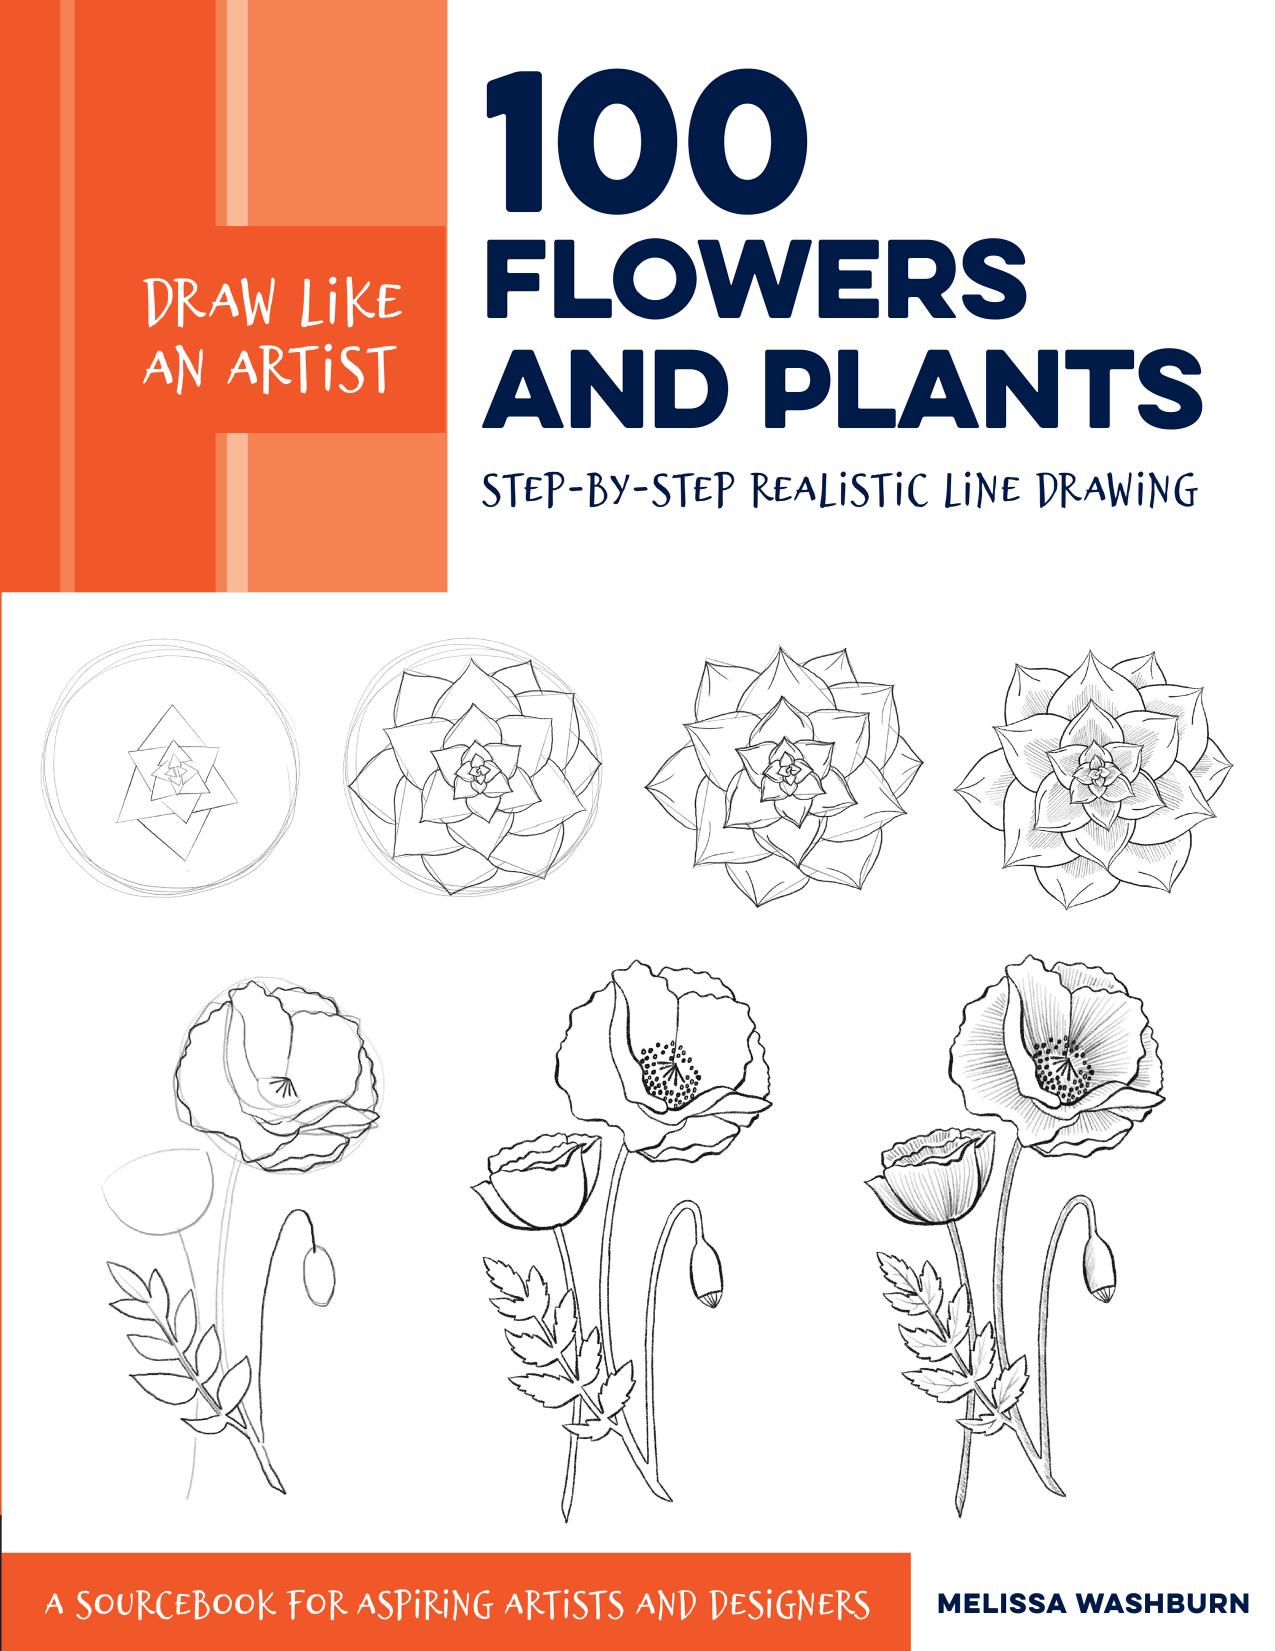 Draw Like an Artist: 100 Flowers and Plants by Melissa Washburn